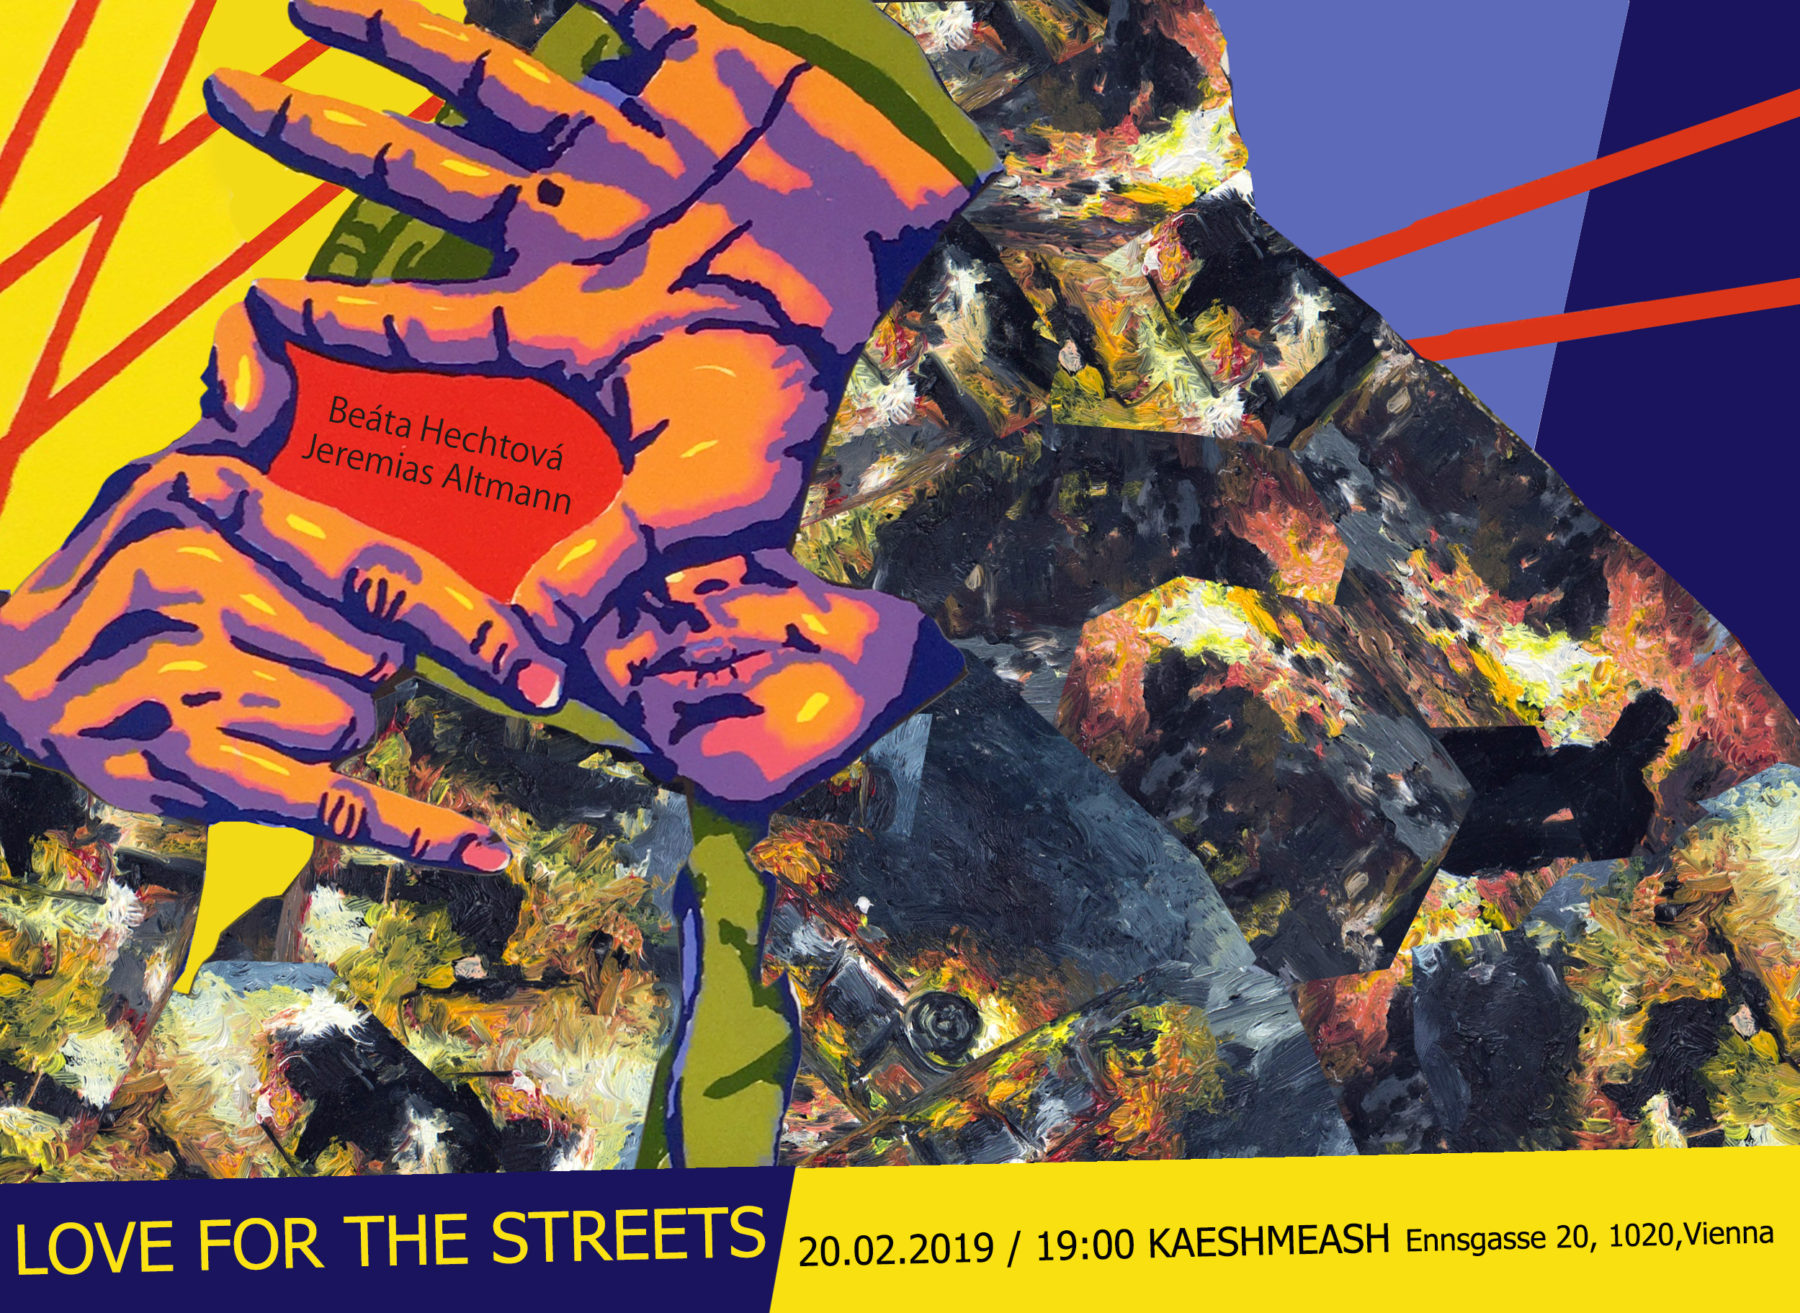 Opening: 20.02.2019 / 19:00 / KAESHMAESH / Ennsgasse 20, 1020 / Vienna
Finissage: 06.03. / 19:00 with live performance by mimi mostah - Mighty Morphing Modular Melodies